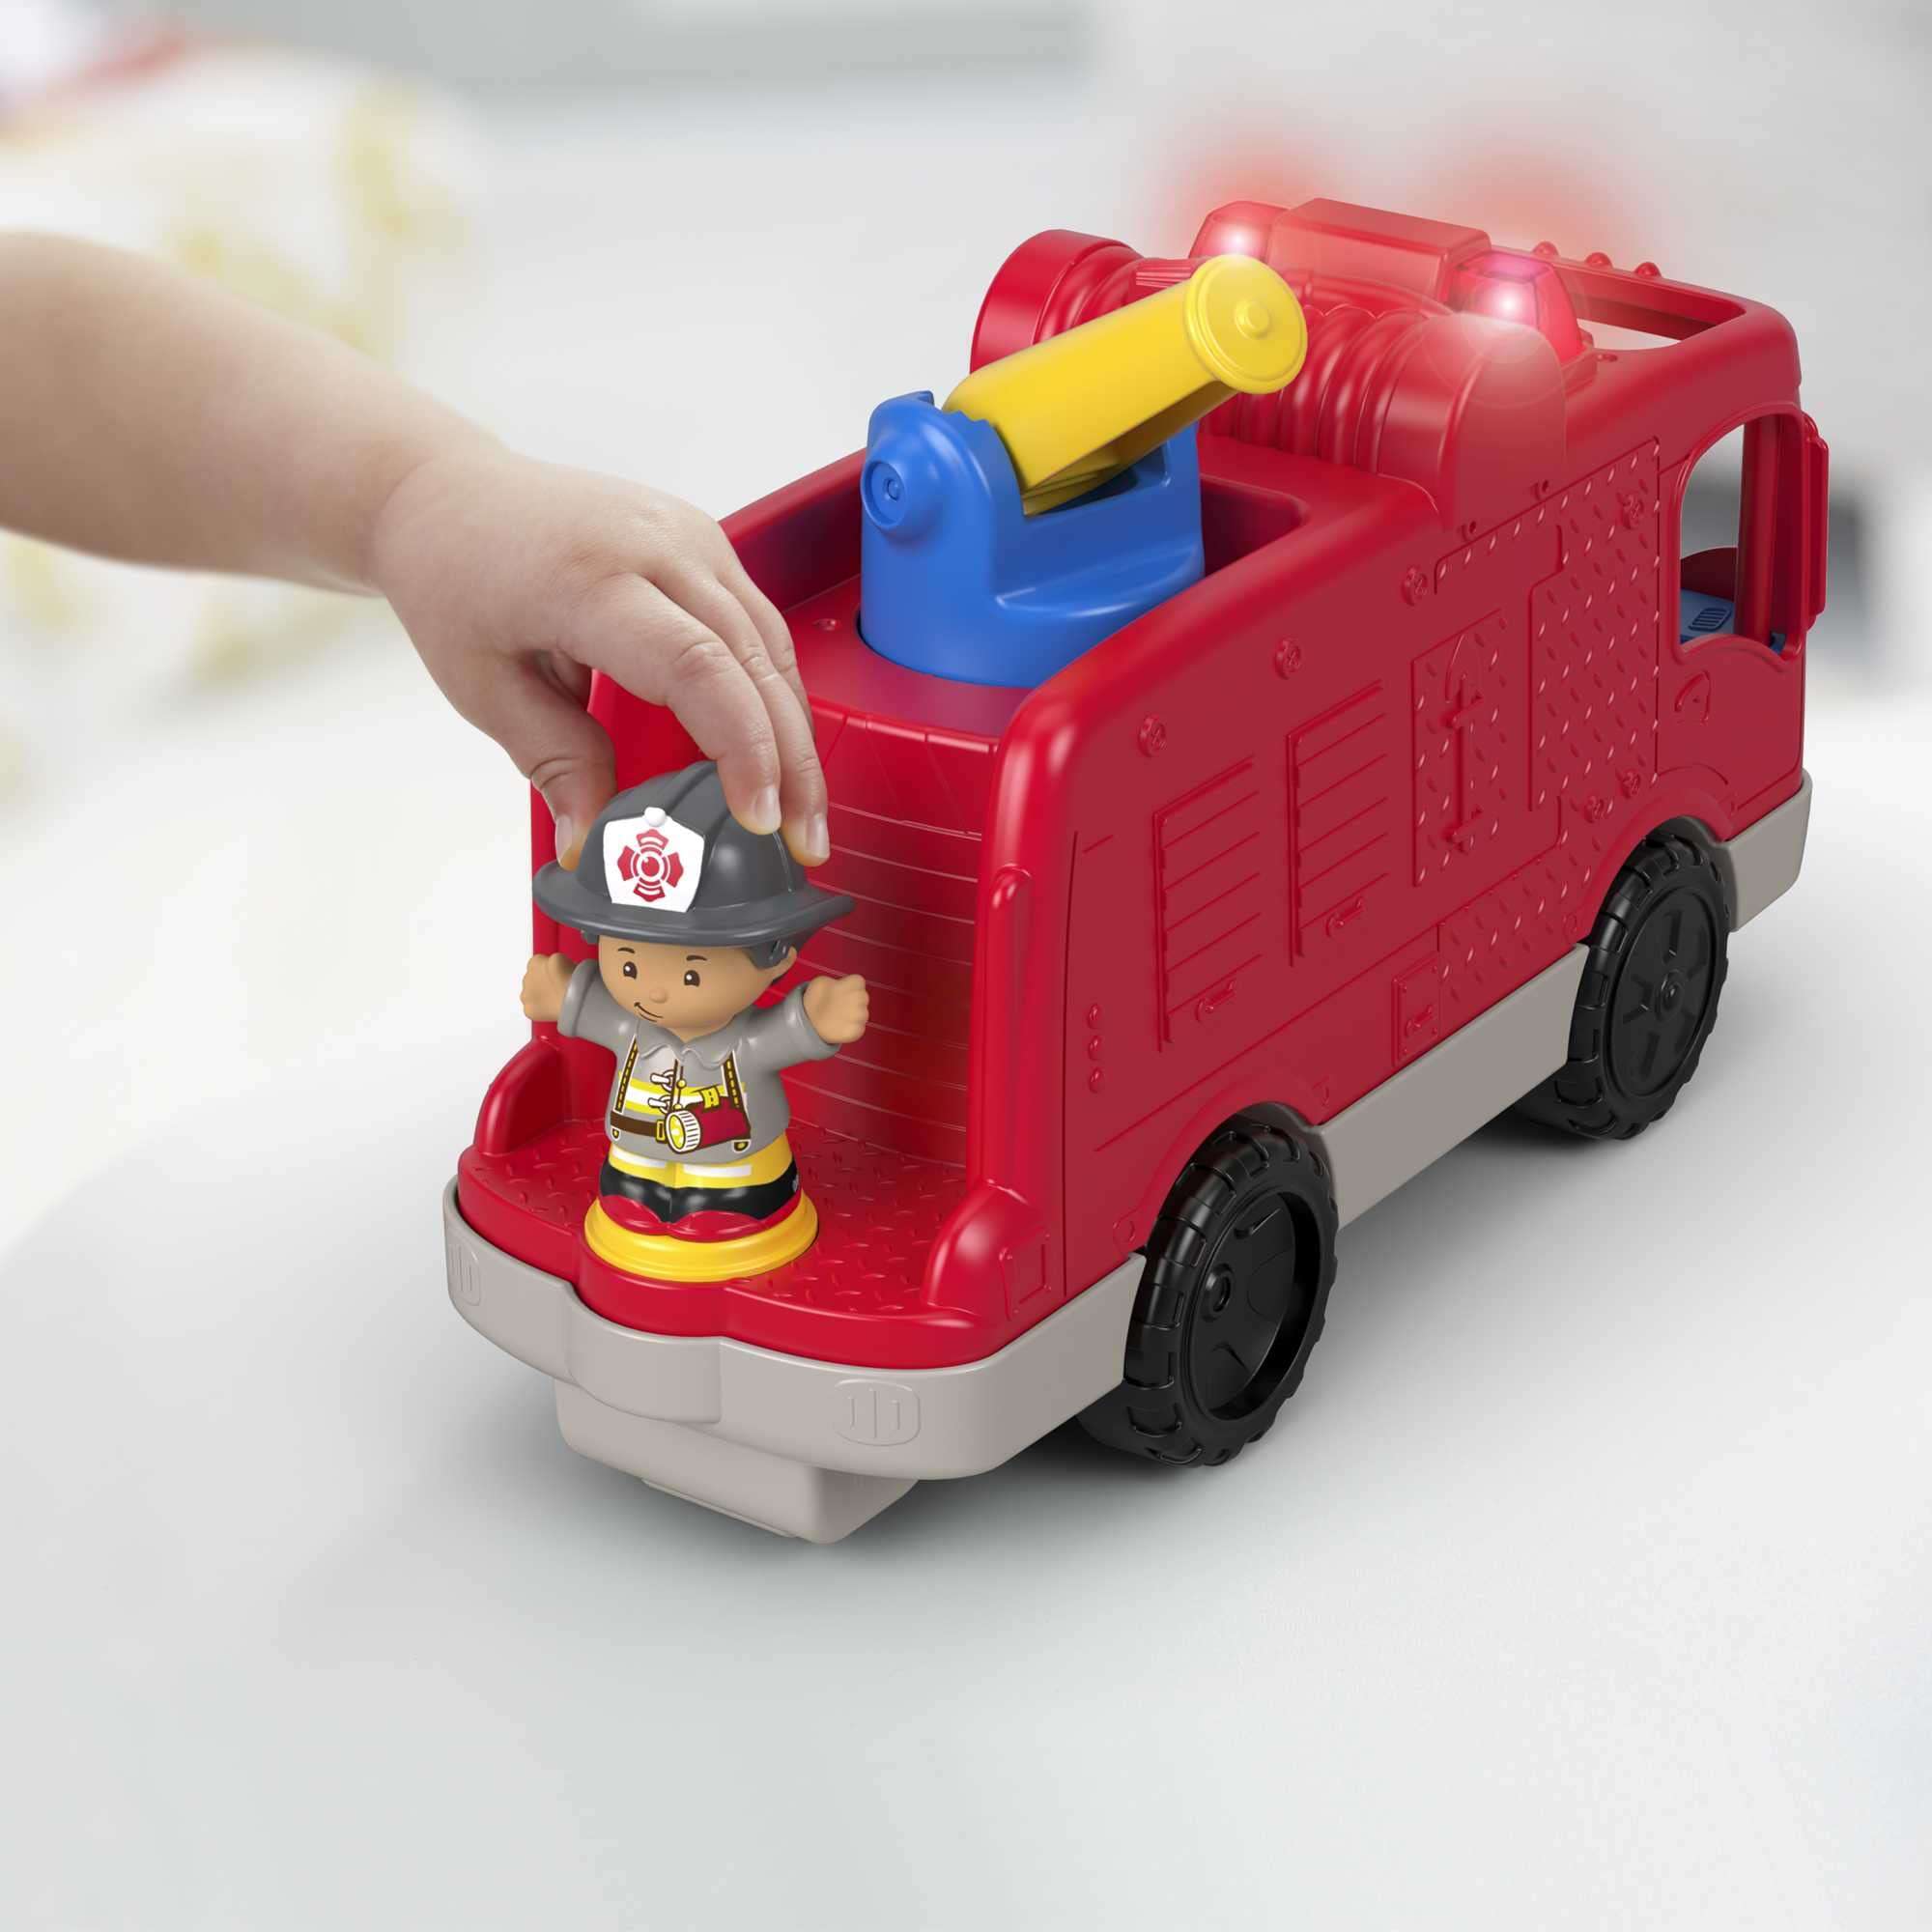 Fisher-Price Little People HCJ35 Fire Engine - Music Toy with Realistic Sounds and Songs, Includes 2 Firefighters and Multilingual Version for Toddlers from 1 Year